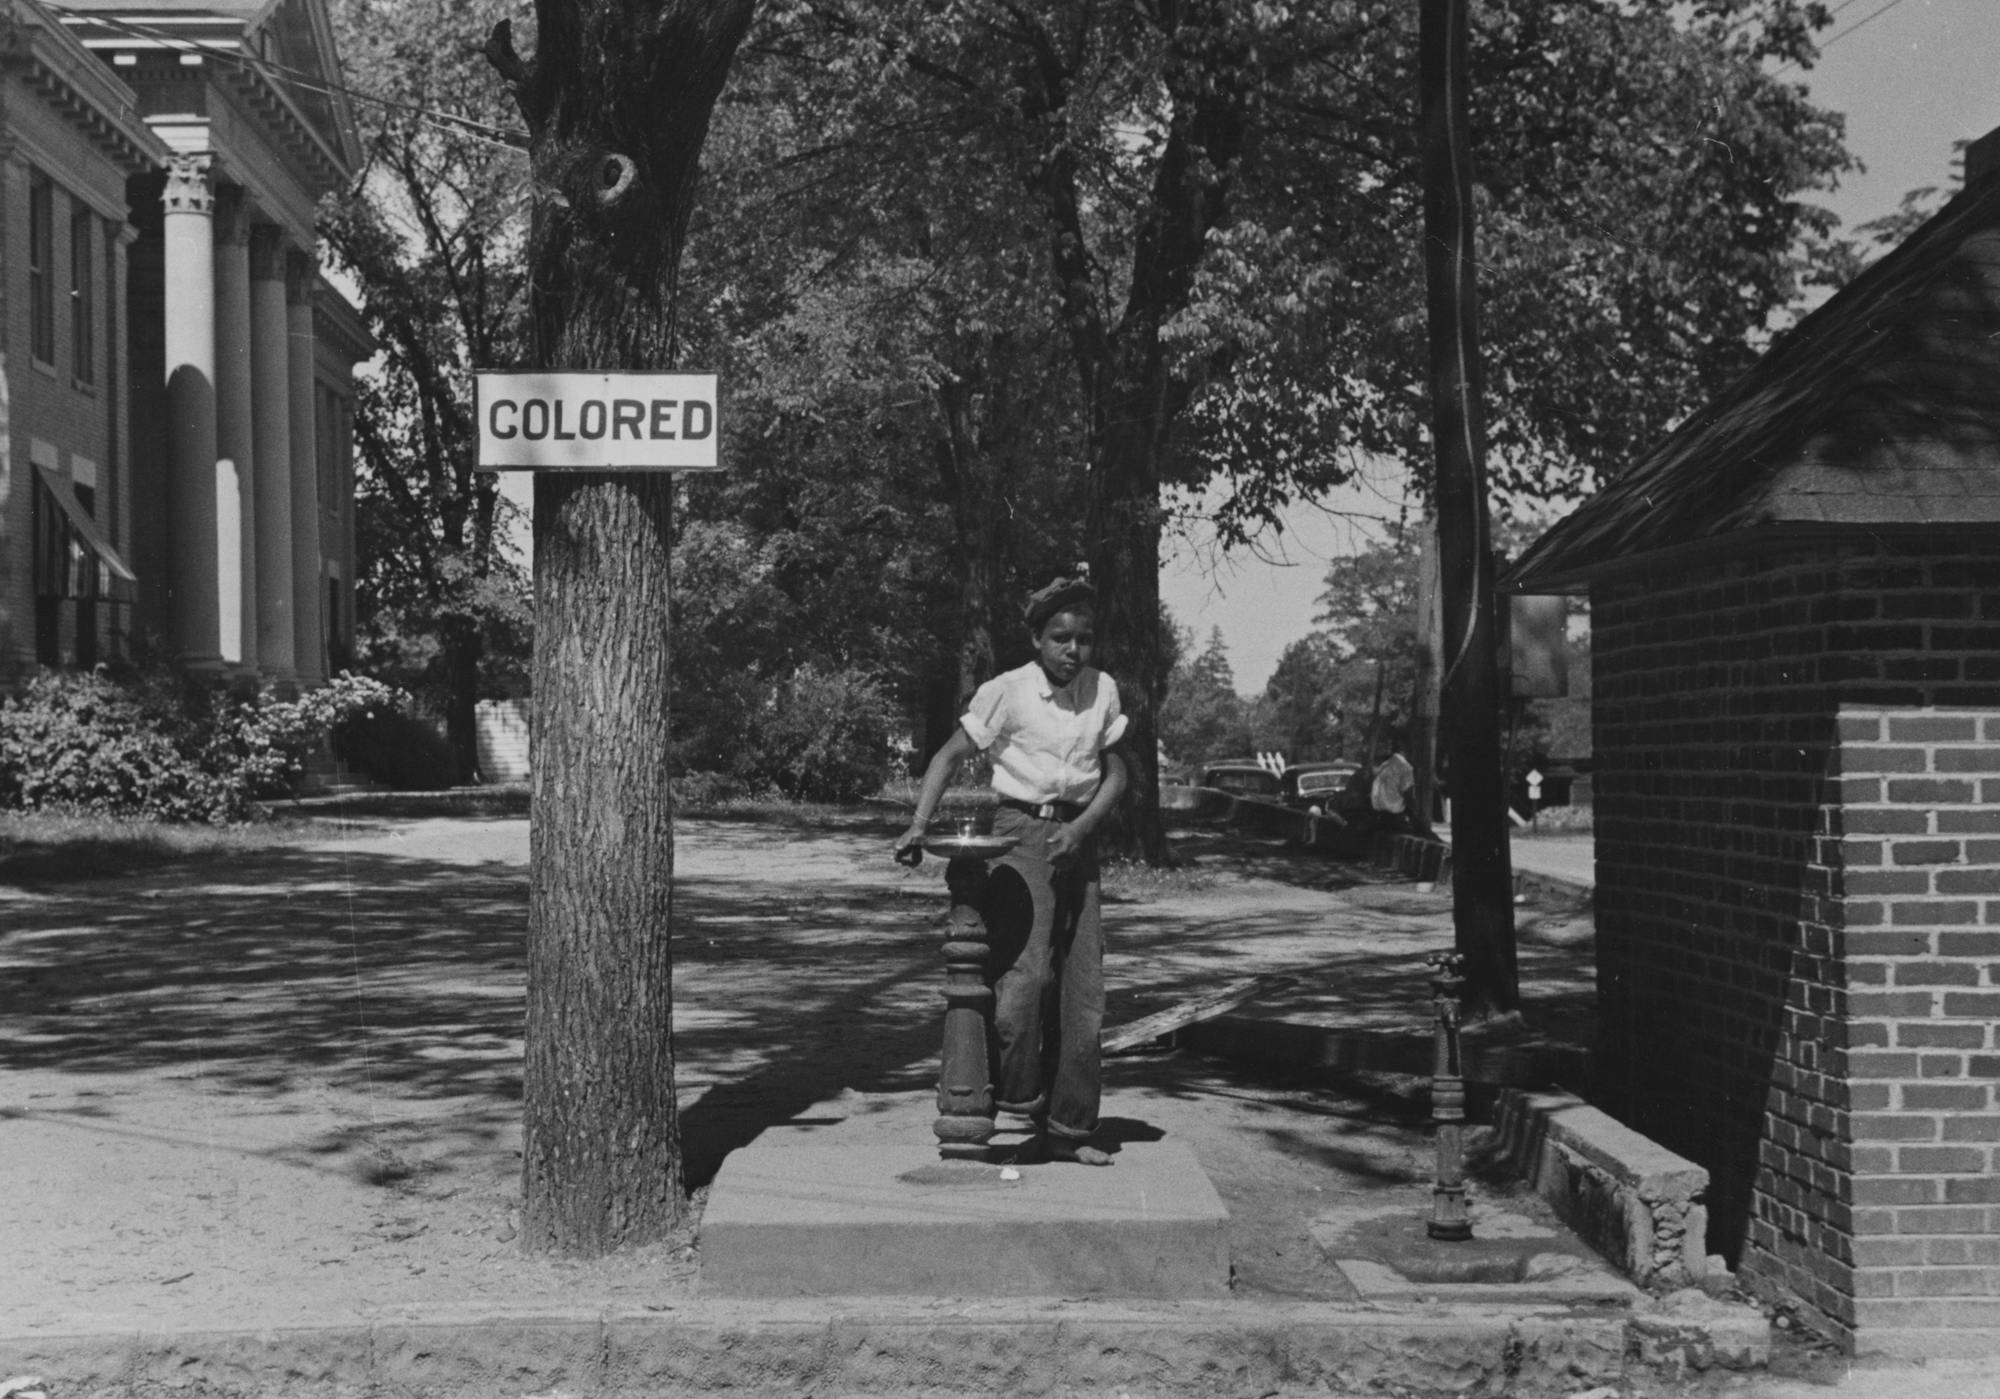 separate water fountains for black people still stand in the south – thinly veiled monuments to the long, strange, dehumanizing history of segregation